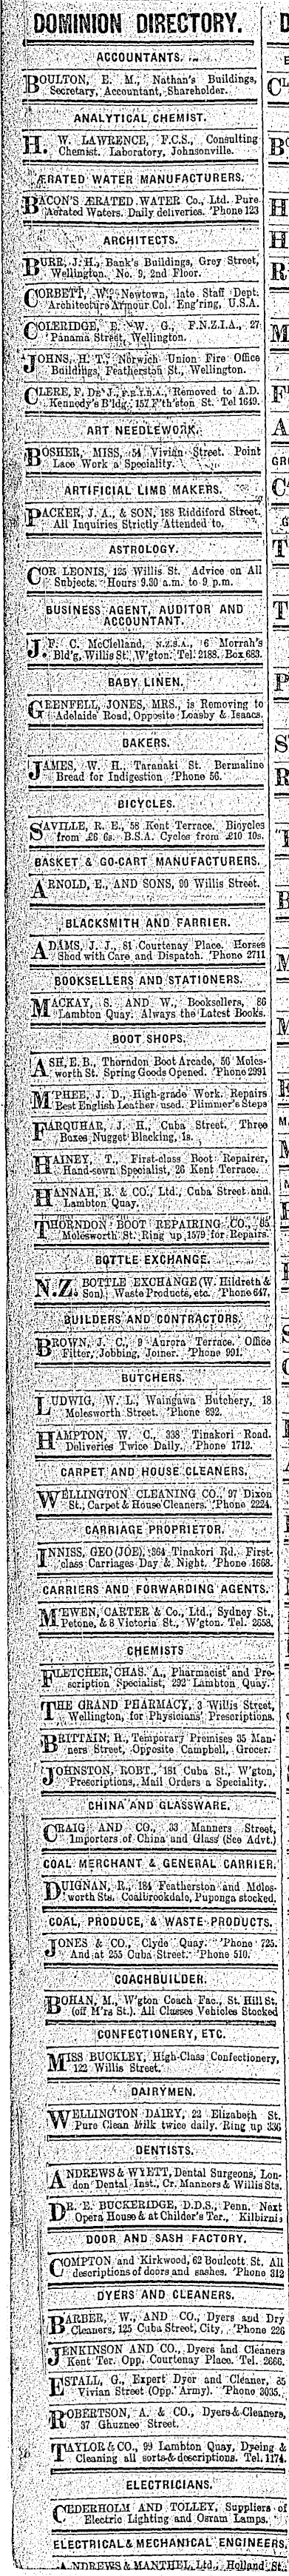 Papers Past Newspapers Dominion 10 December 1909 Page 2 Advertisements Column 1